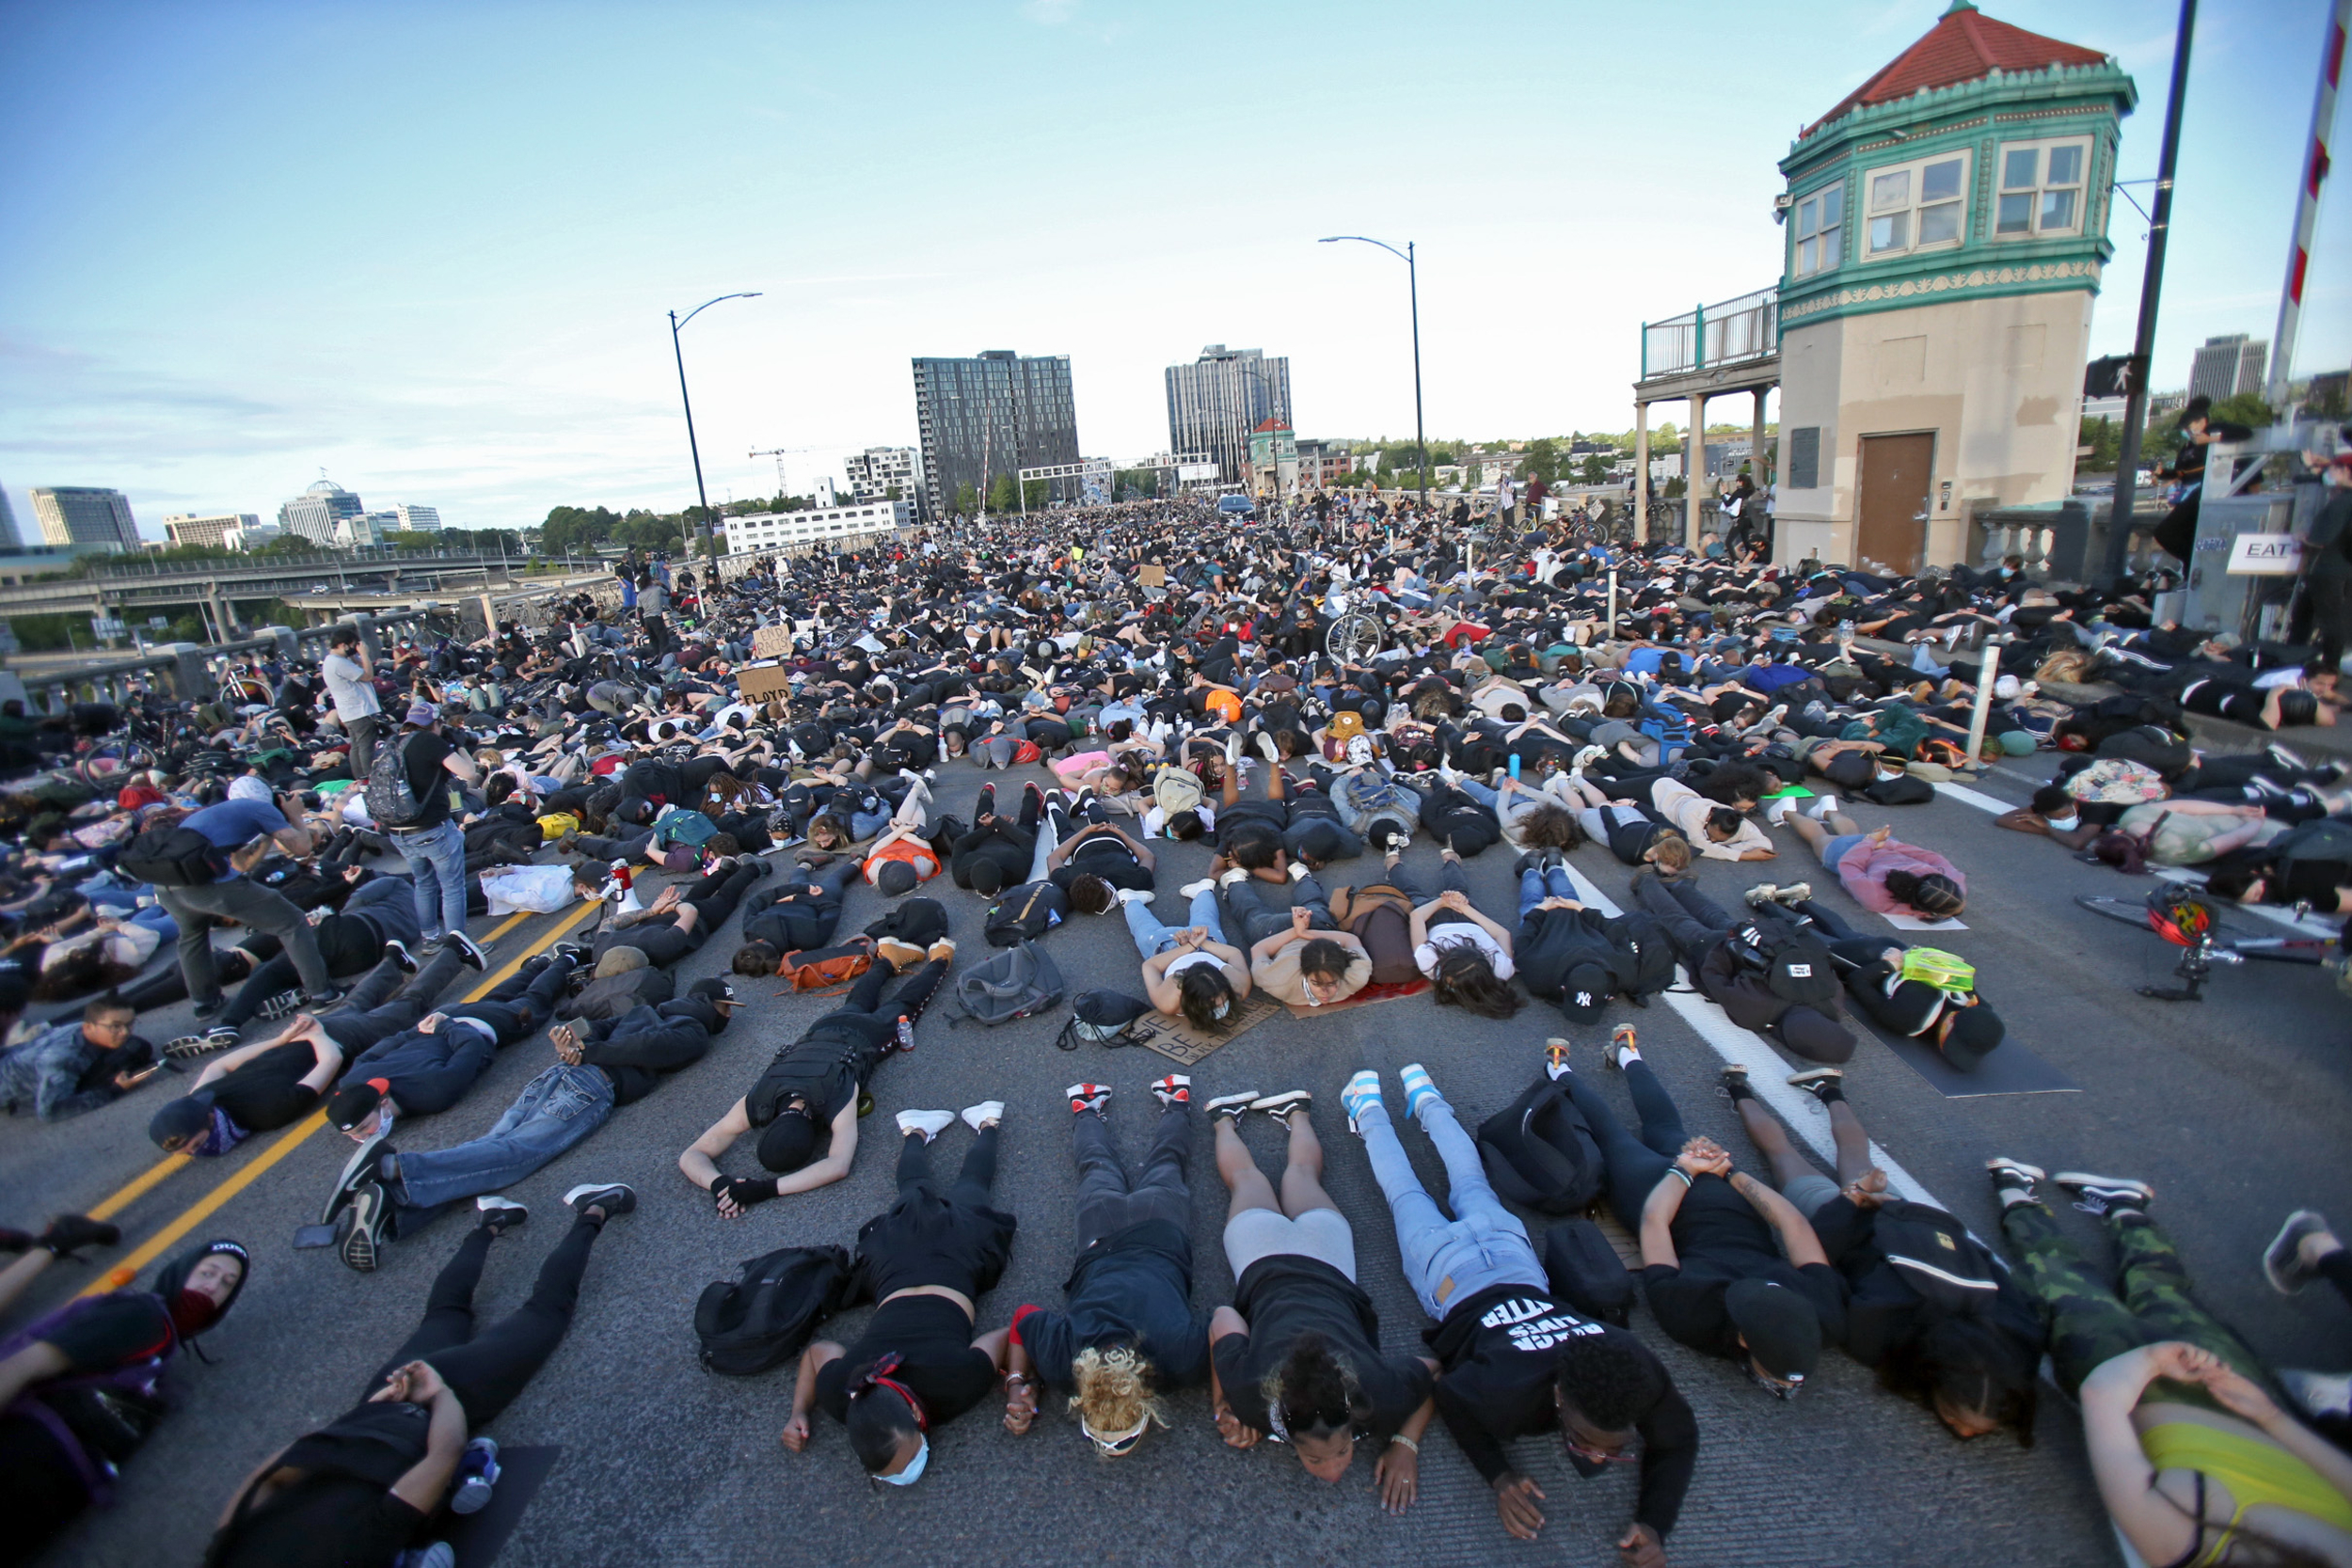 Protests continue for a sixth day in Portland, demonstrating against the death of George Floyd, a black man killed by police in Minneapolis. Sean Meagher/Staff